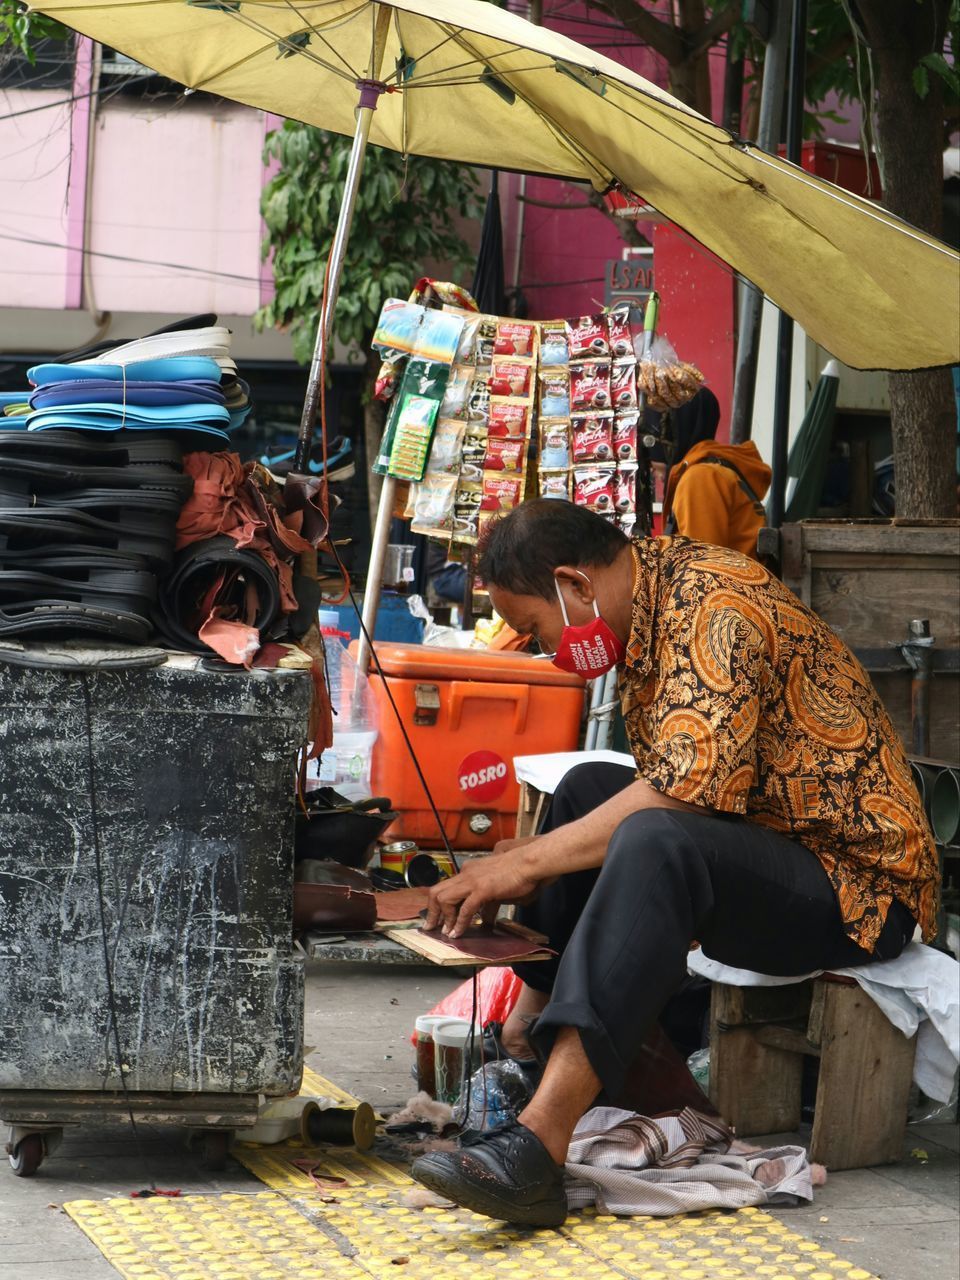 GROUP OF PEOPLE WORKING AT MARKET STALL